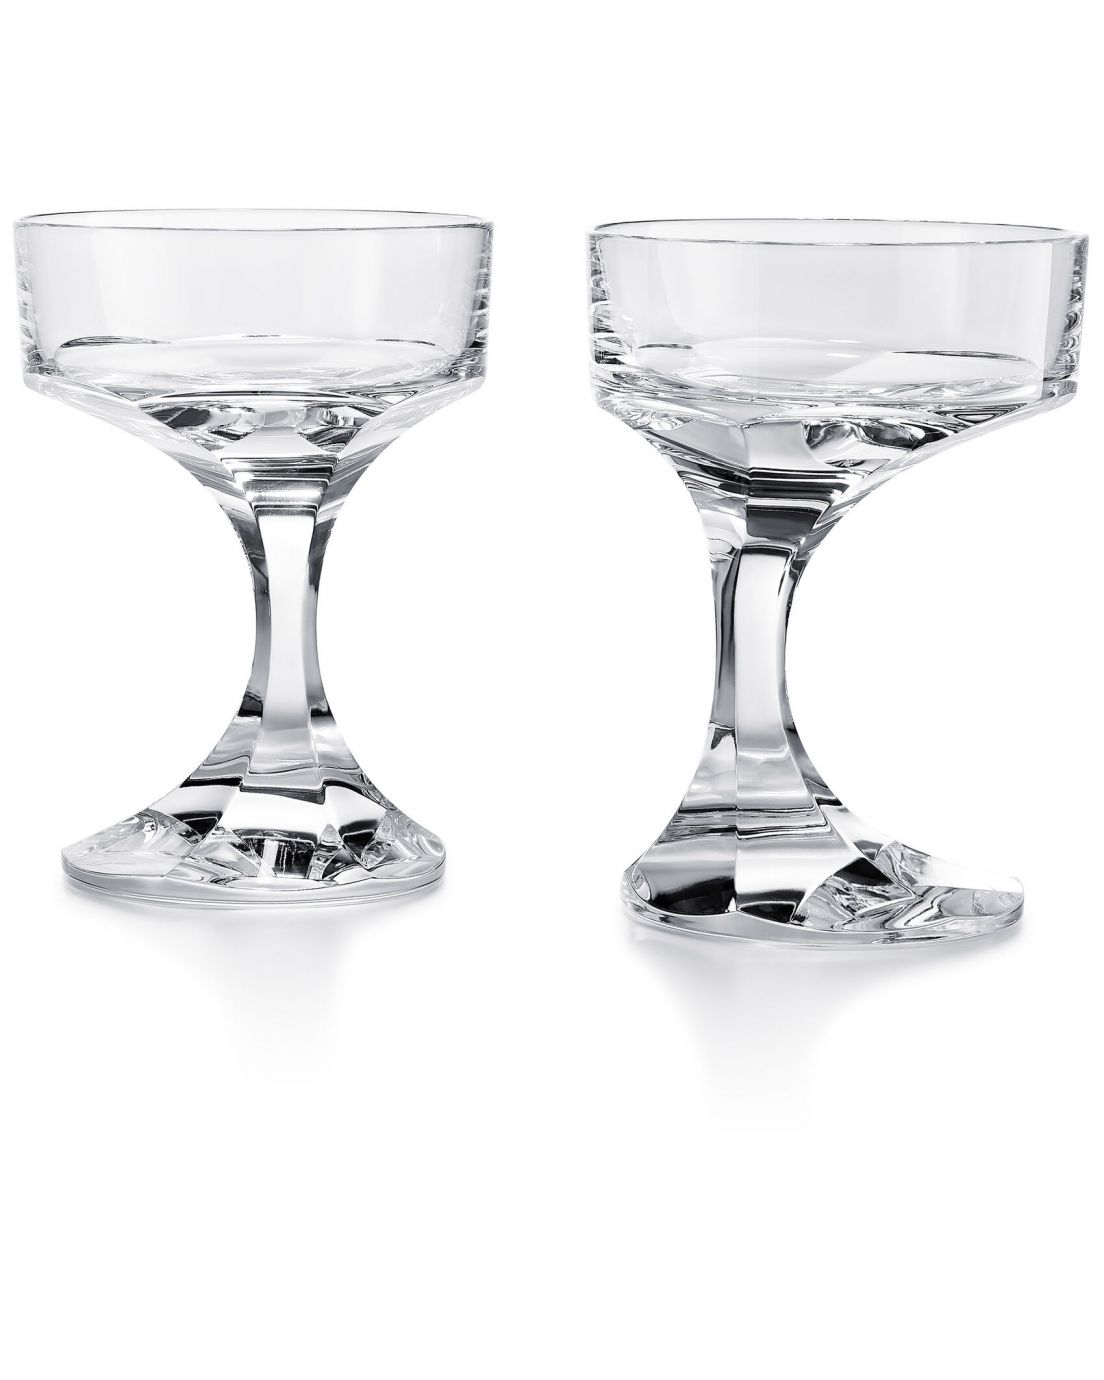 Narcisse Champagne Coupe, Set of 2